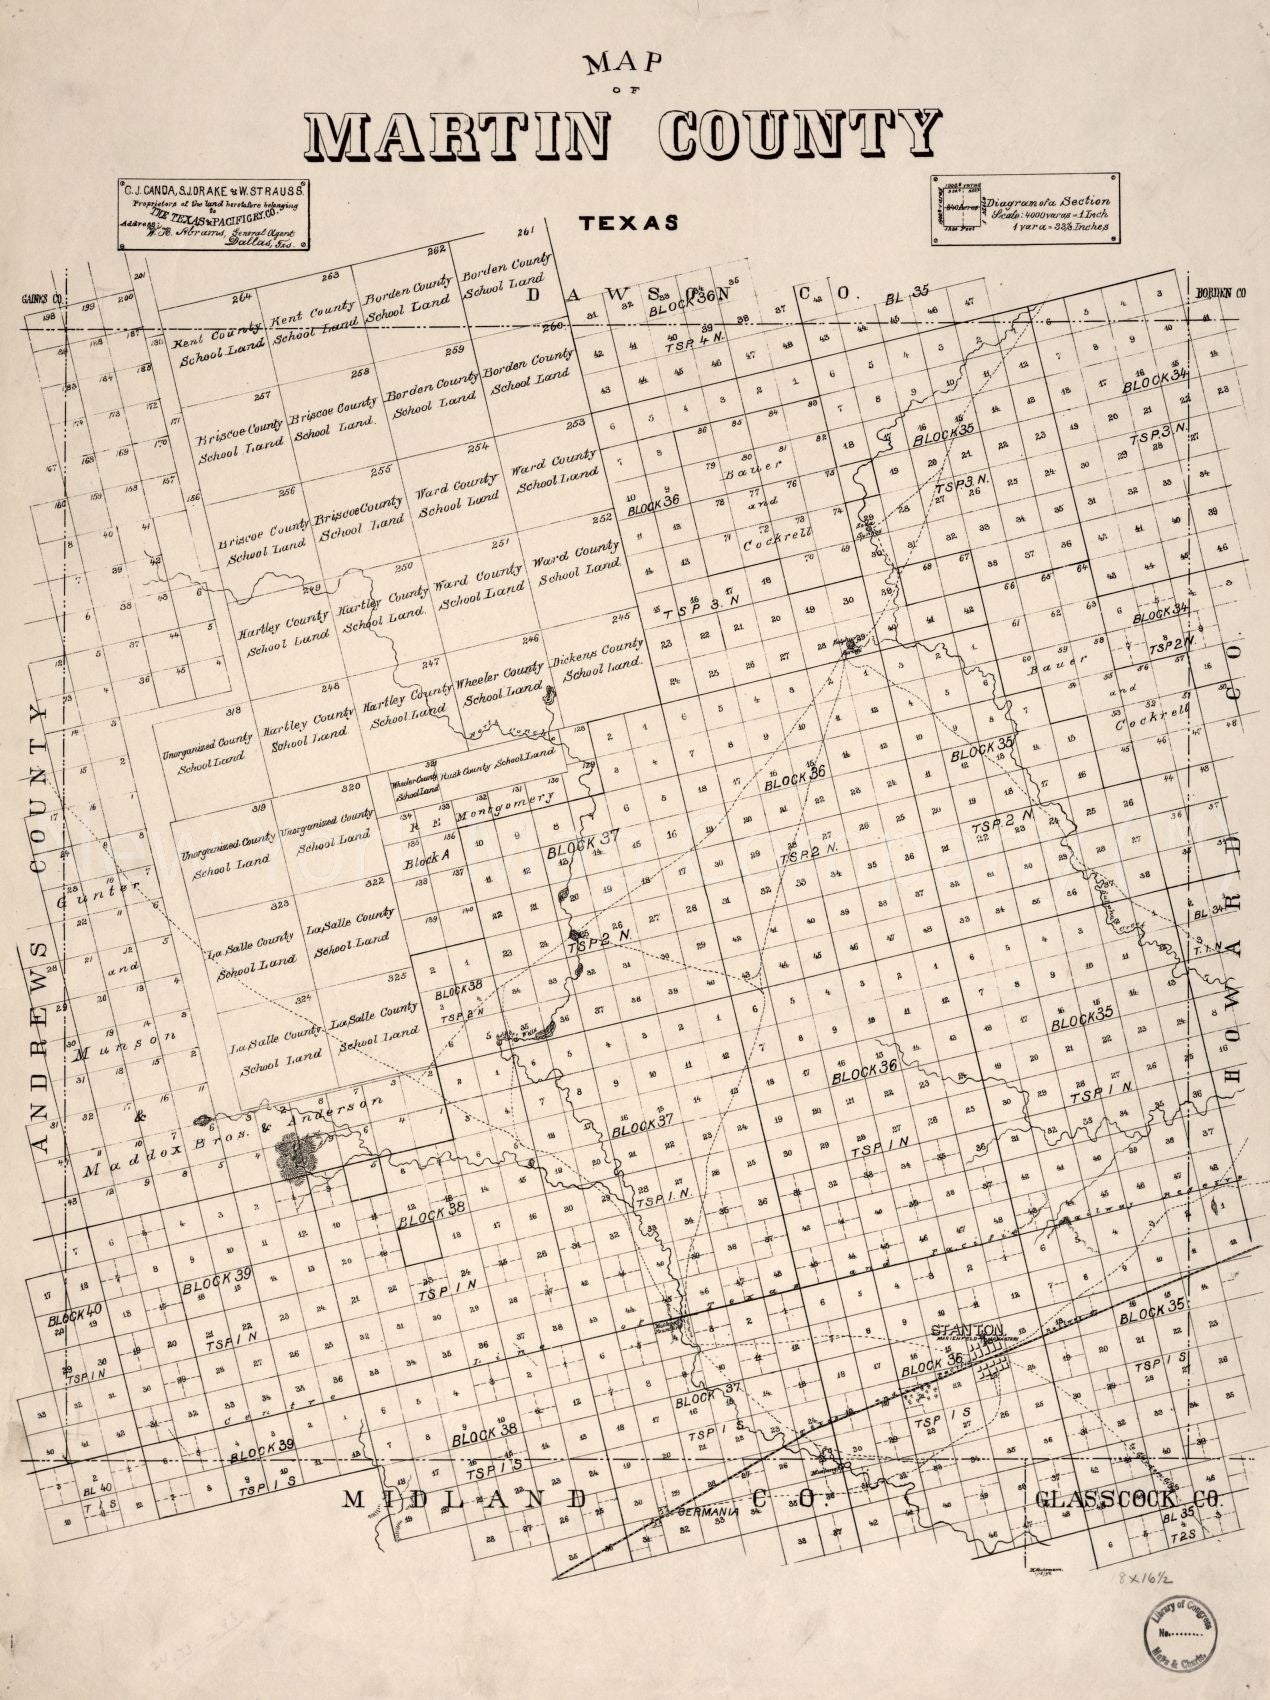 1894 map of Martin County, Texas. C. J. Canda, S. J. Drake and W. Strauss, proprietors of the lands heretofore belonging to the Texas and Pacific Ry. Co. Address: W. H. Abrams, general agent, Dallas, Txs. Map Subjects: Landowners | Martin County | Martin